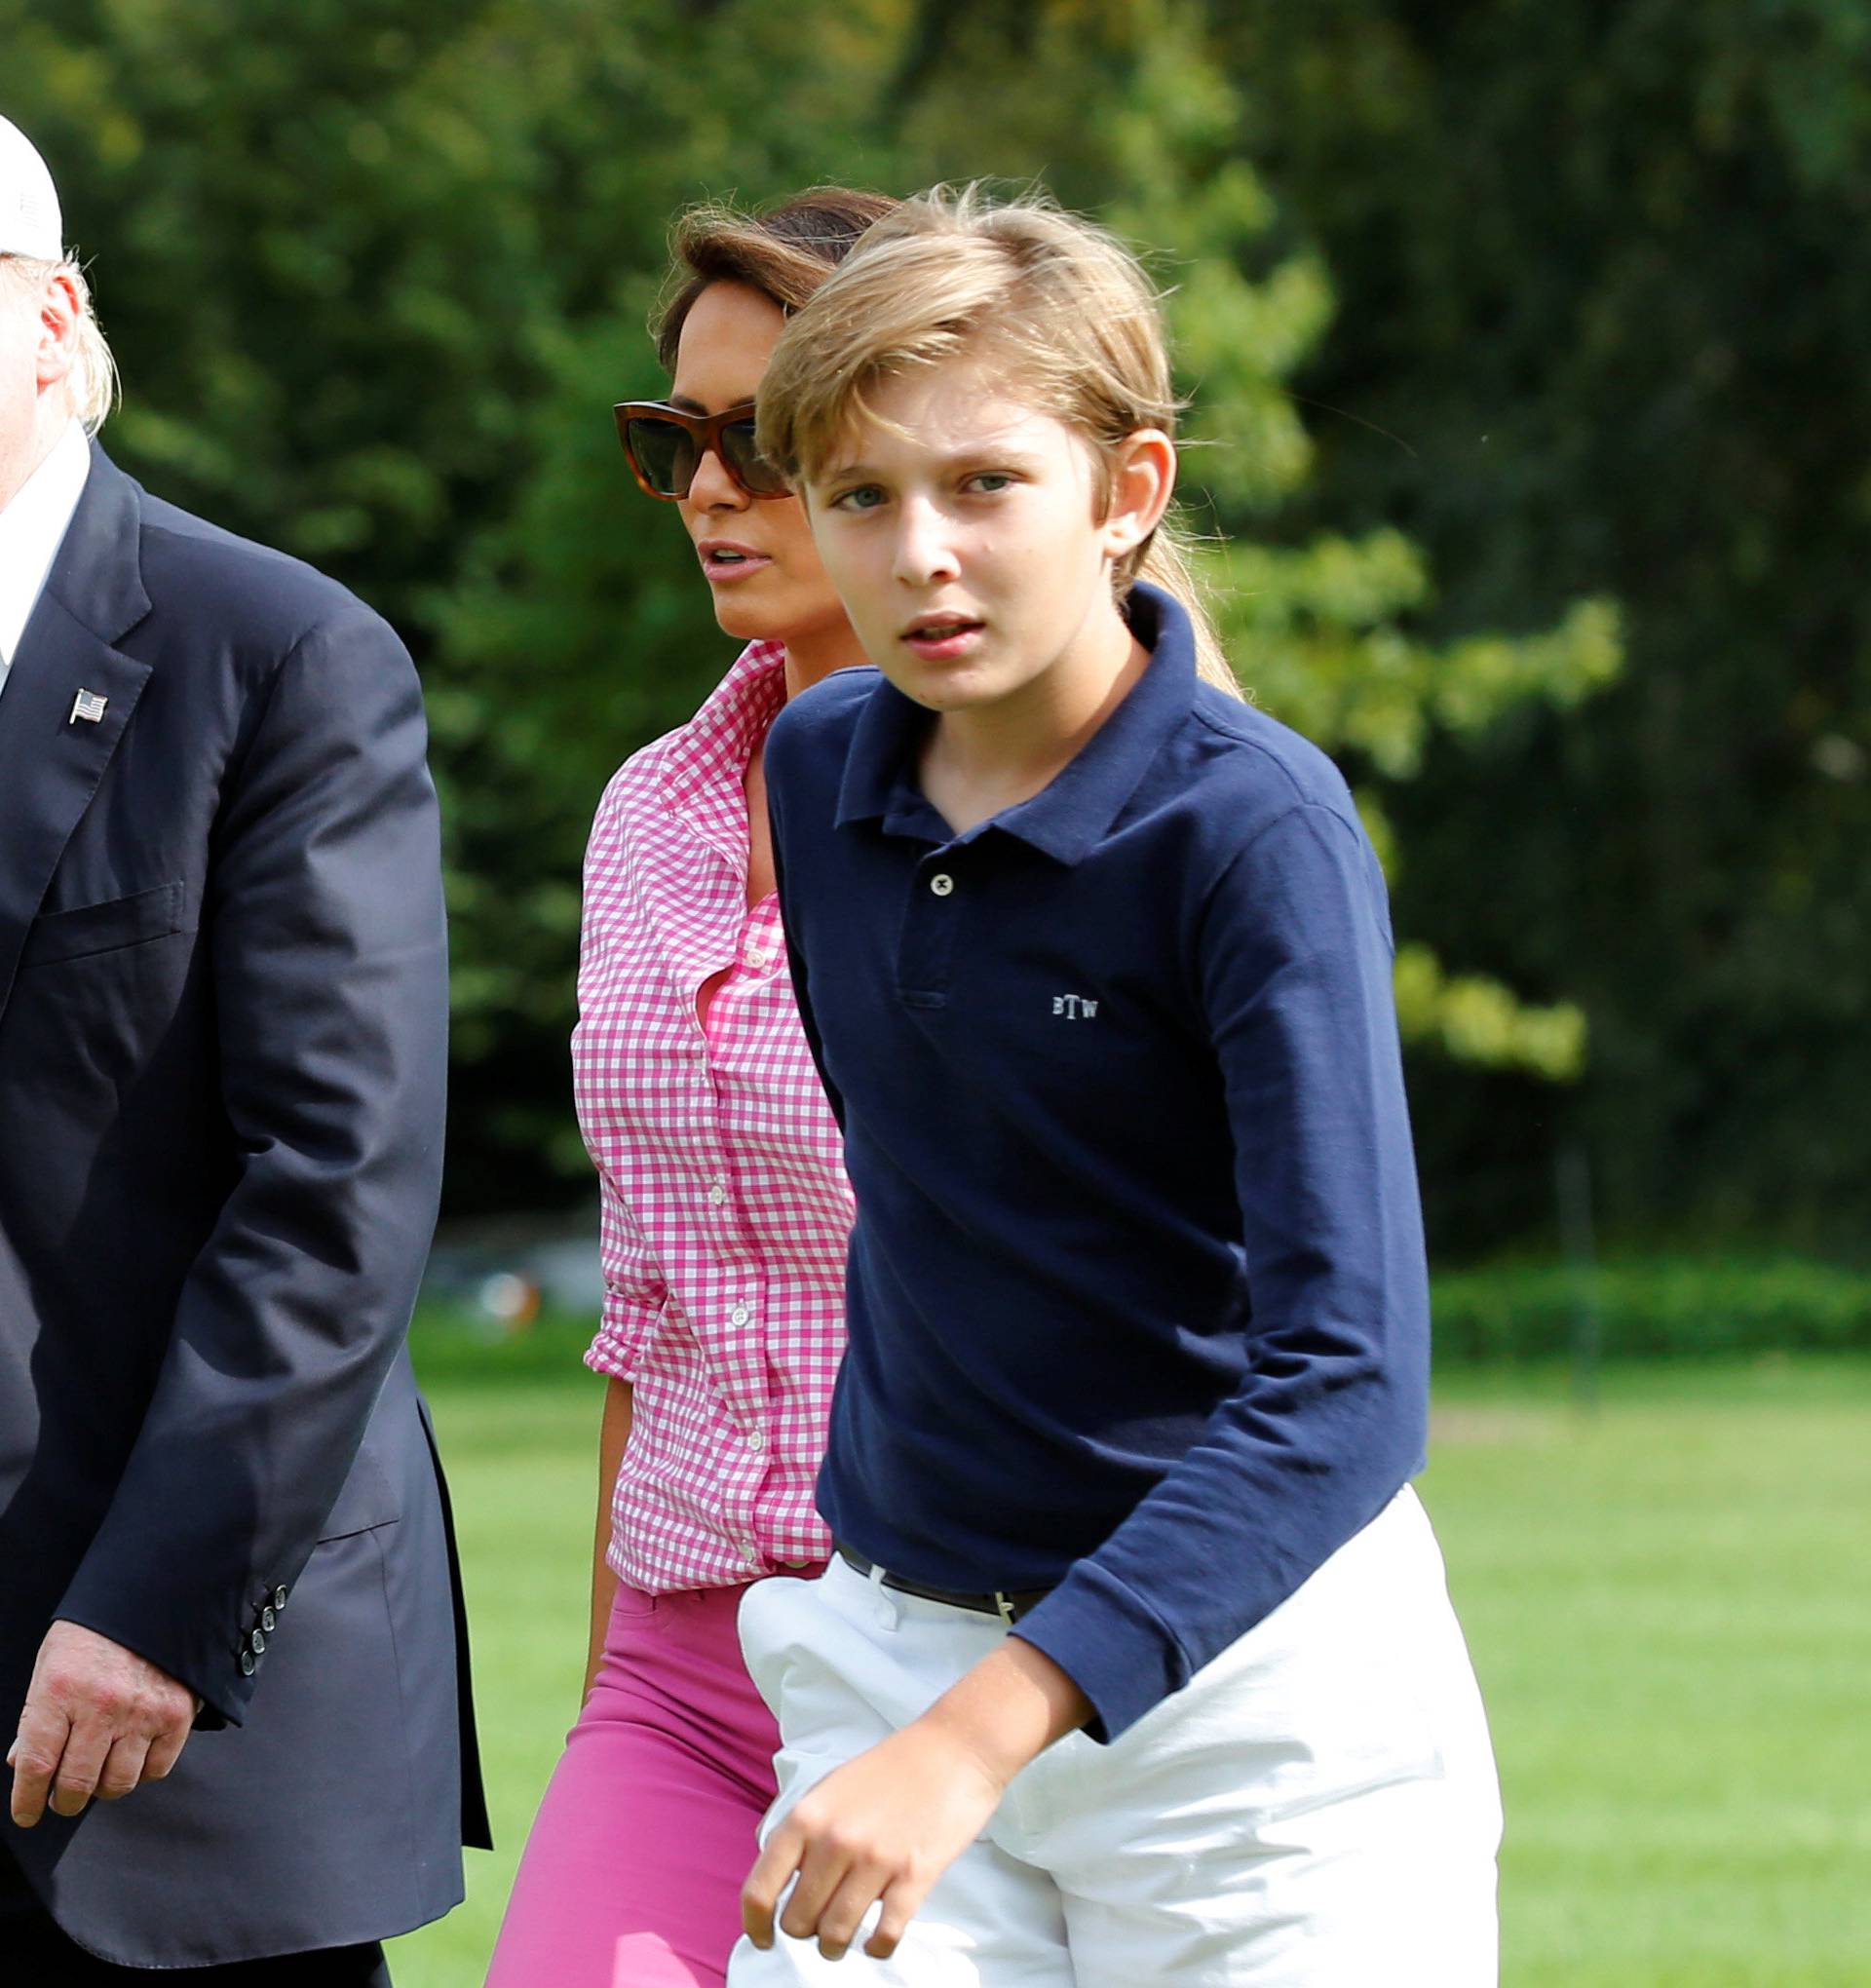 President Donald Trump waves as he with First Lady Melania Trump and their son Barron walk on South Lawn of the White House